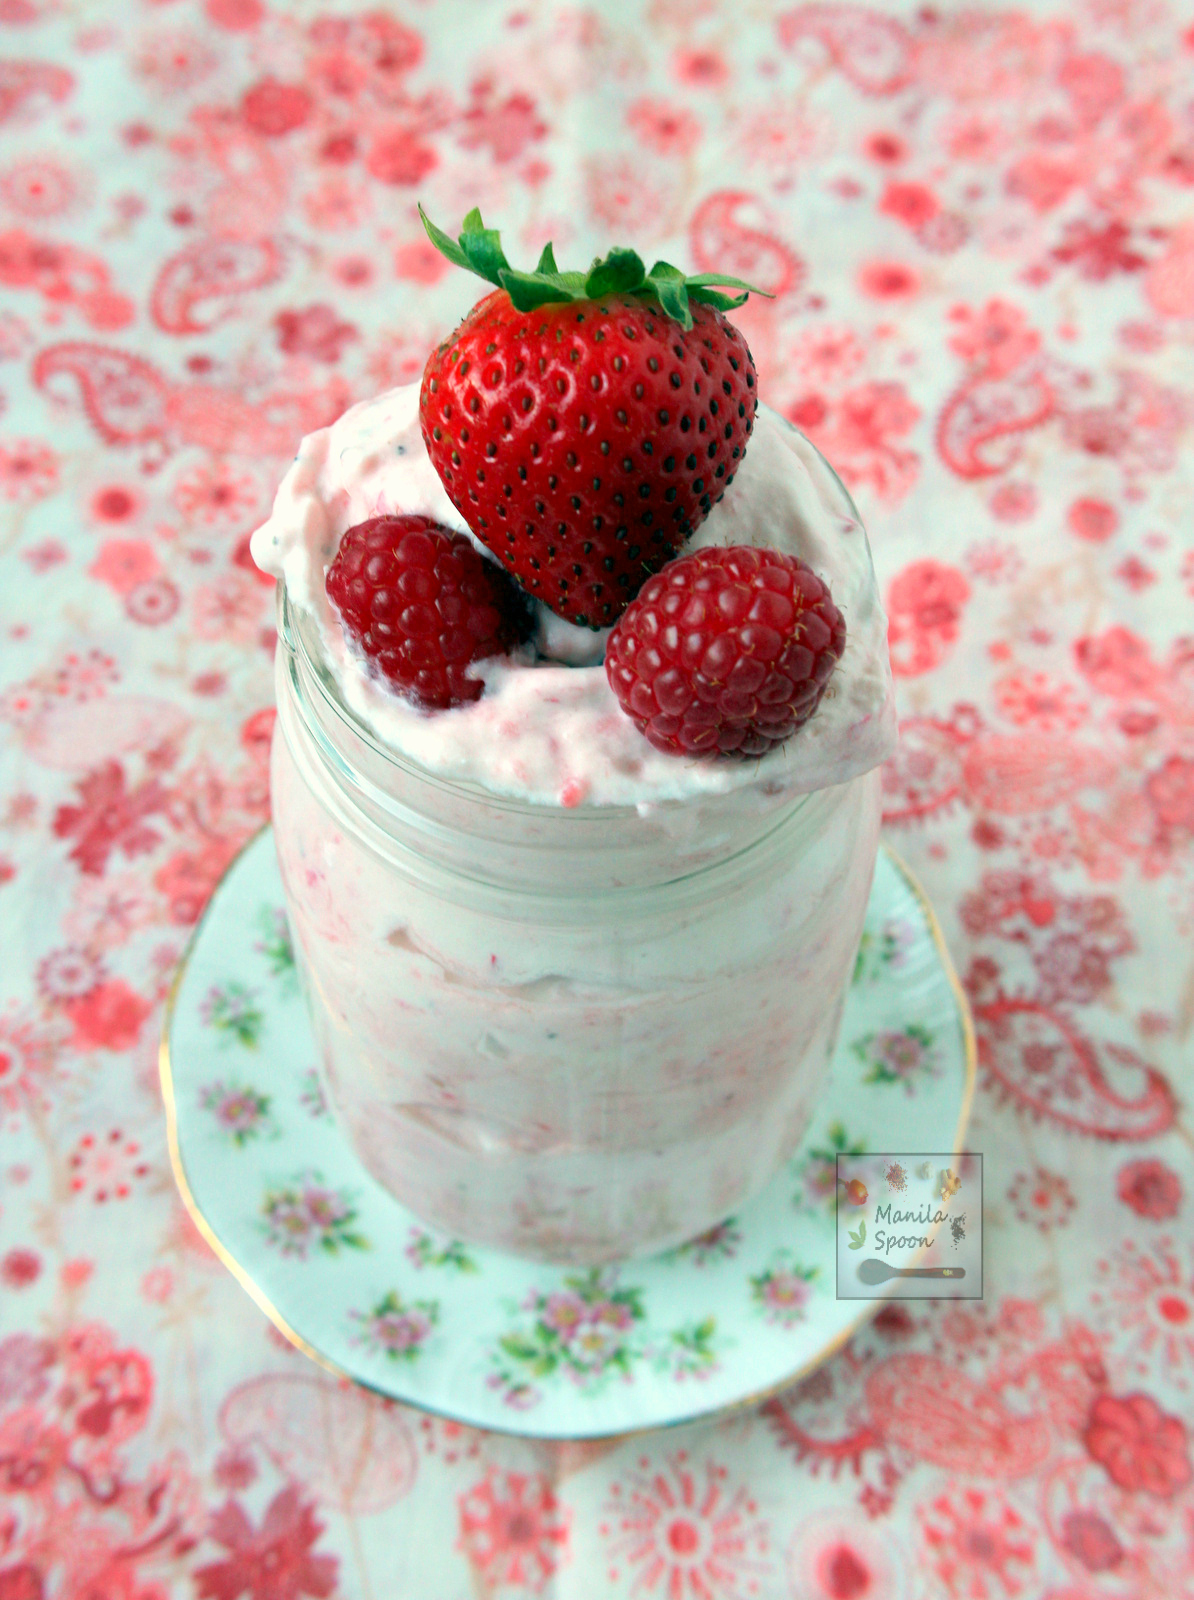 A yummy, quick and super-easy way to enjoy summer berries! Puree the berry or fruit of choice, fold into the sweetened whipped cream and voila - a fruity-licious and creamy Strawberry and Raspberry Fool that everyone will love! #strawberryfool #raspberryfool #englishdessert #summer